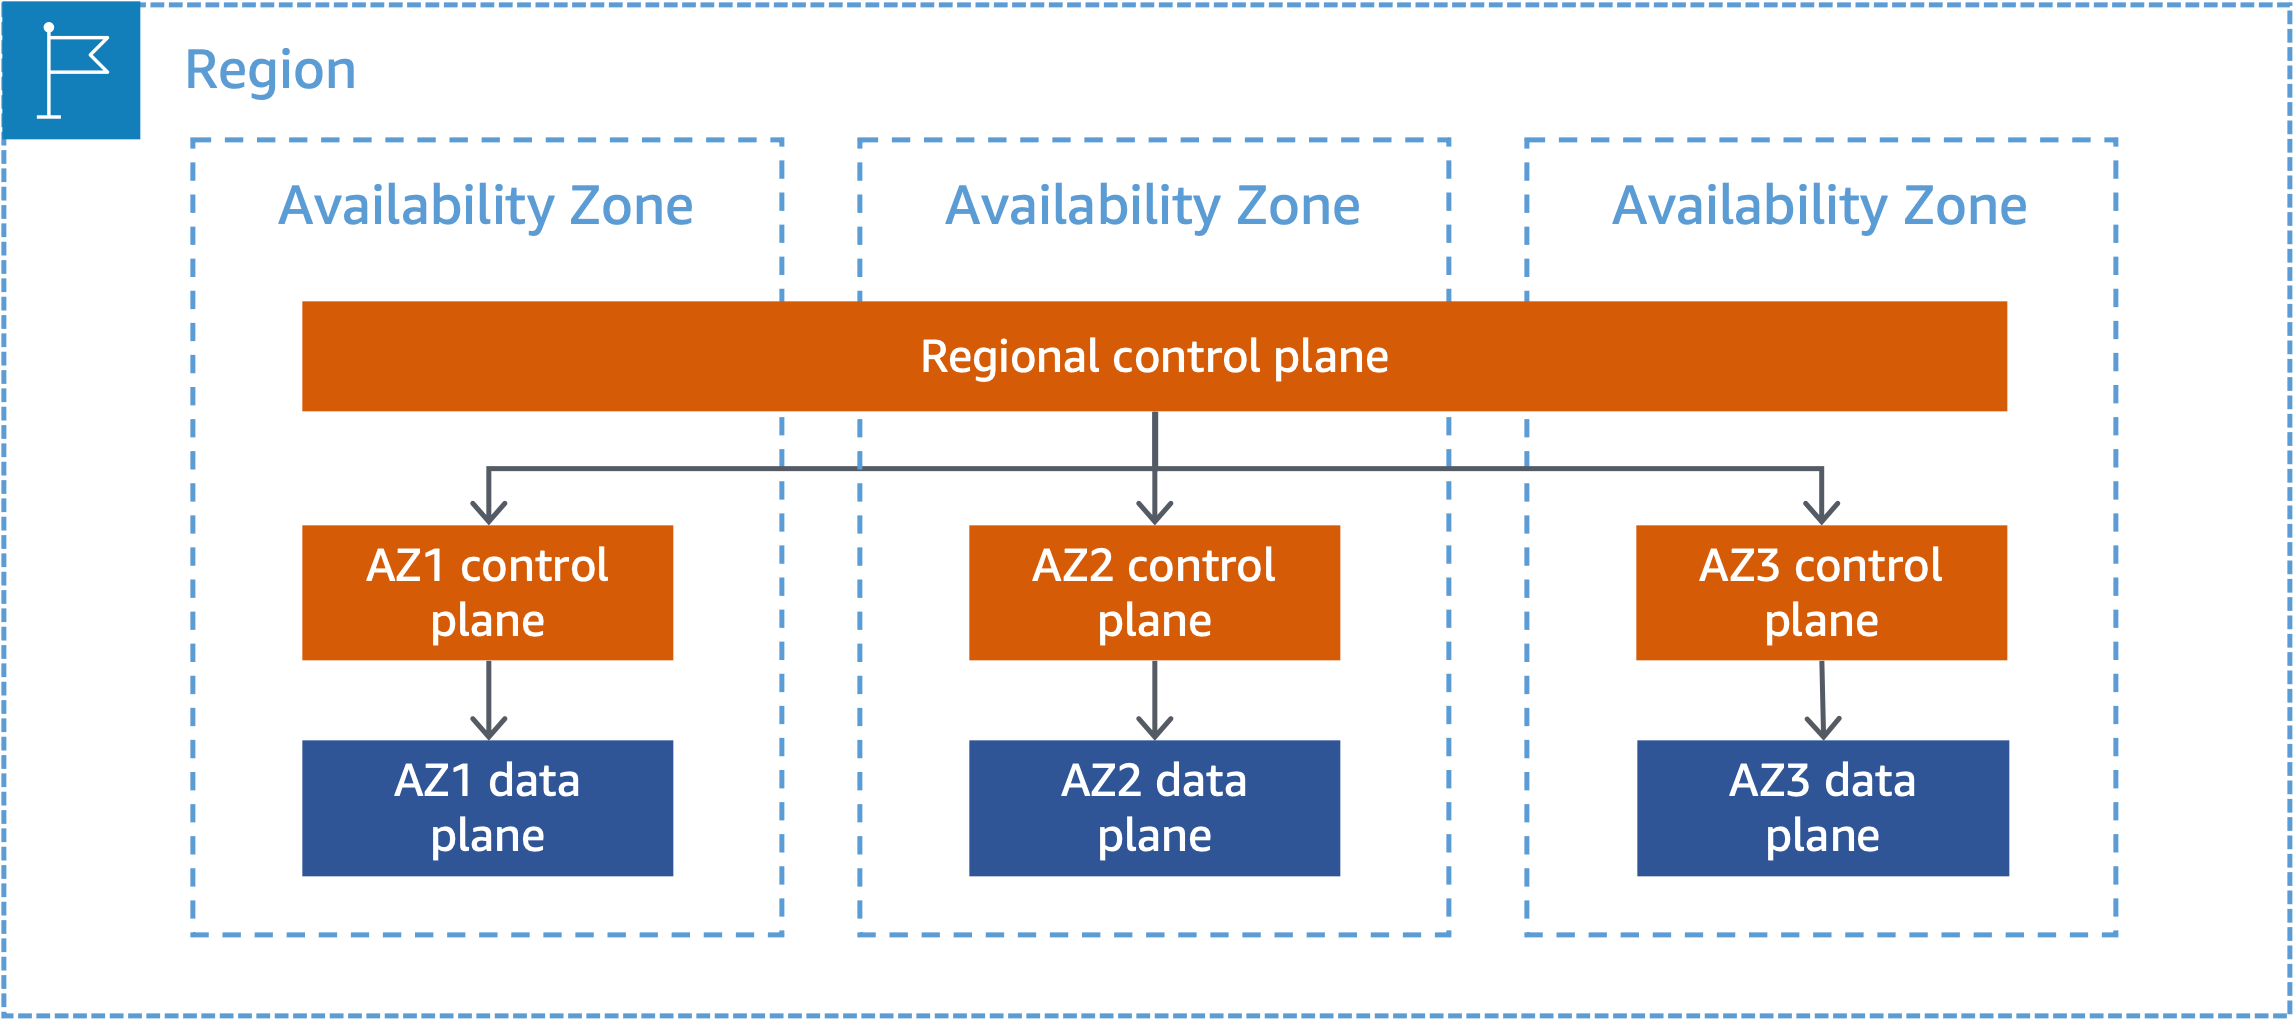 This image shows a zonal service with zonally isolated control planes and data planes